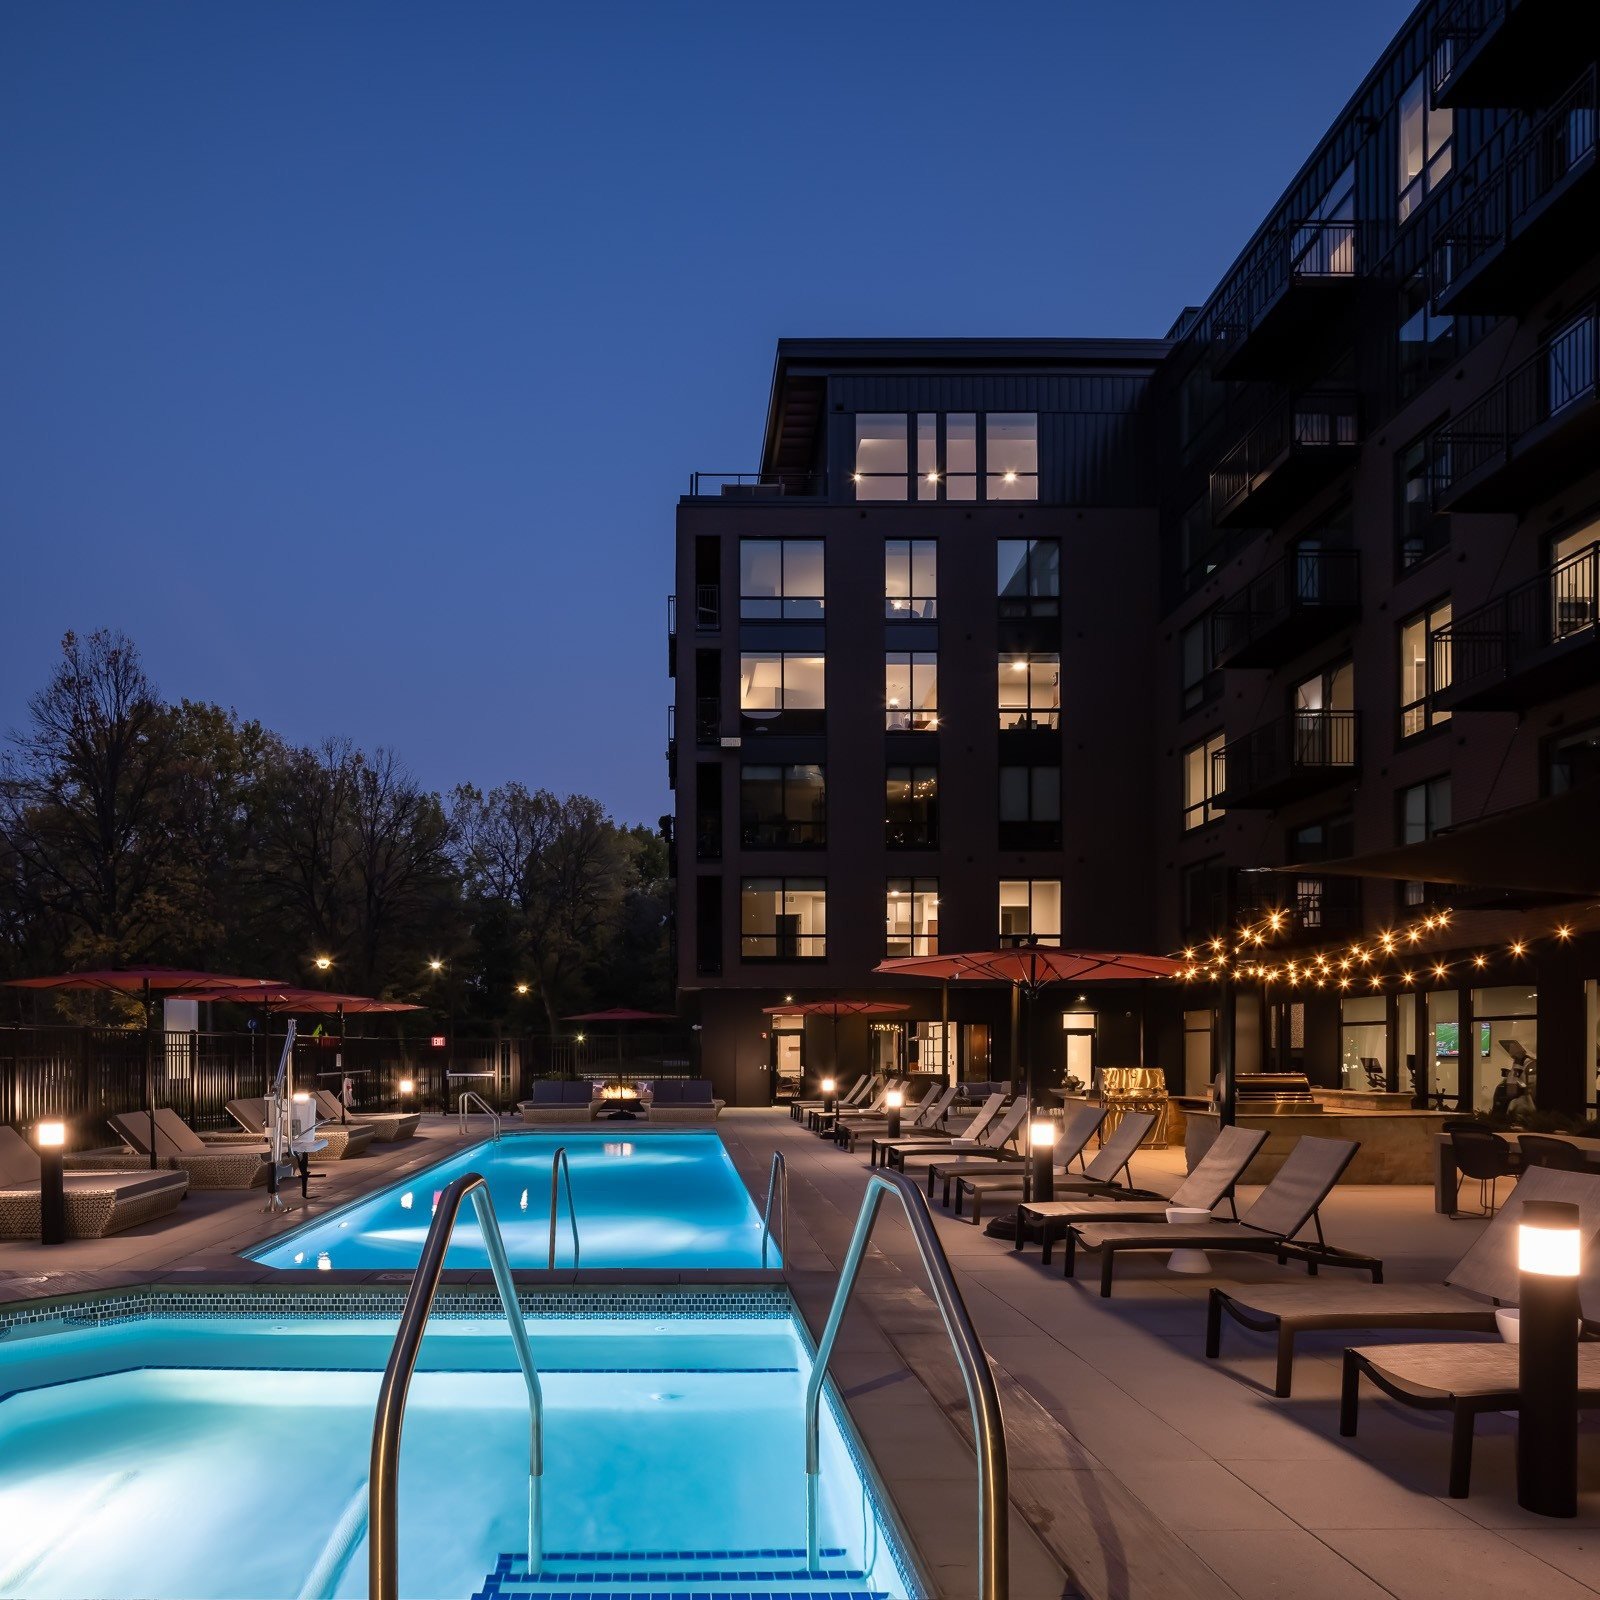 a swimming pool at night in front of an apartment building